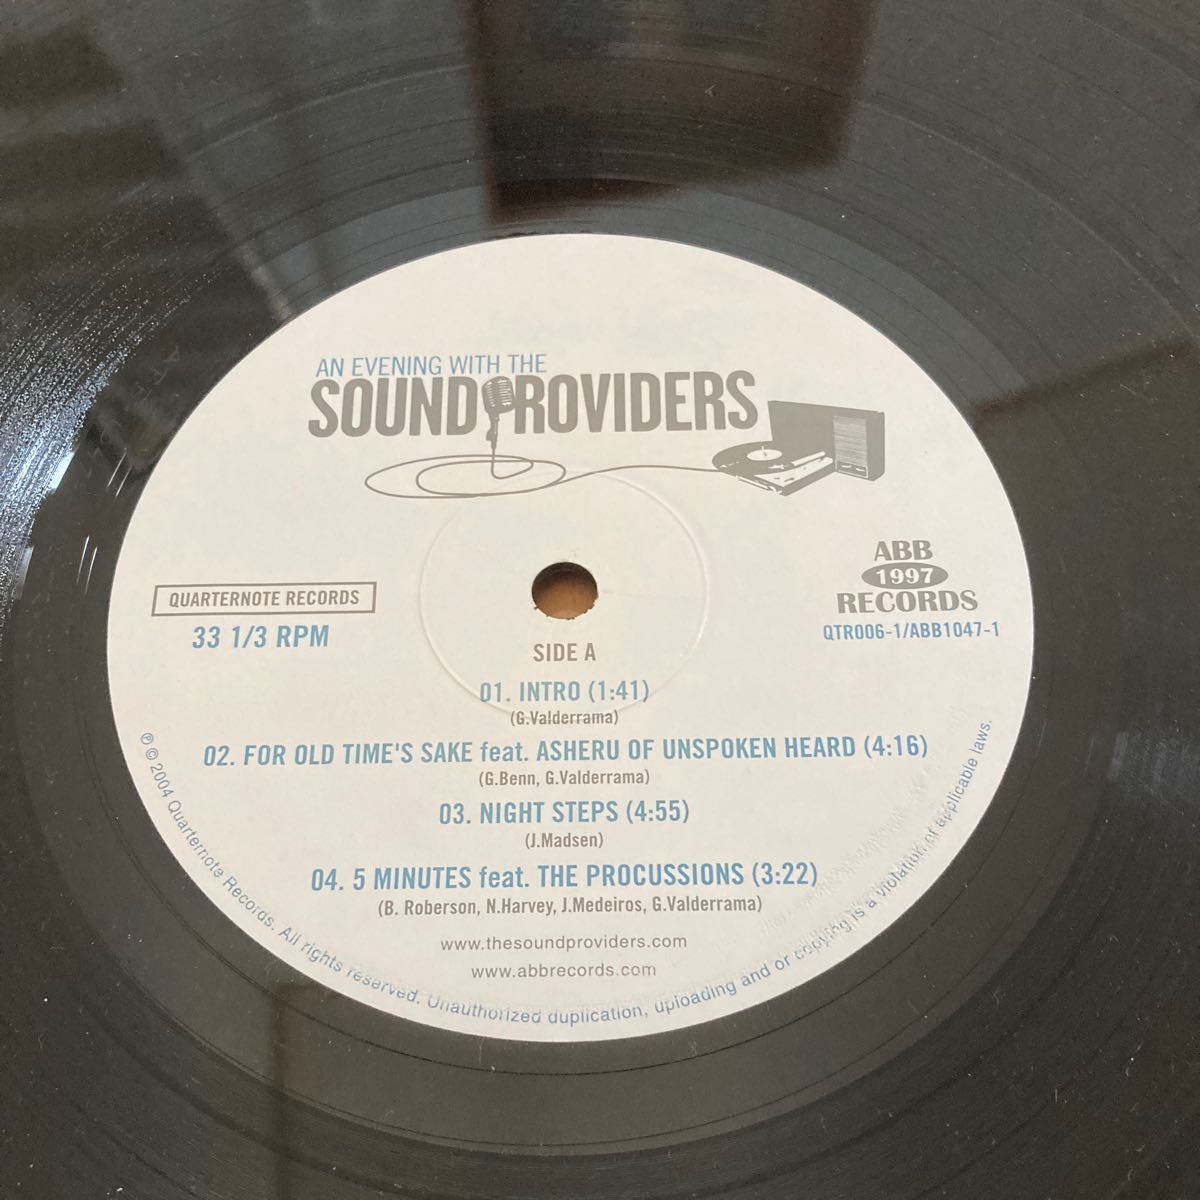 An evening with the Sound providers レコード　2LP レコード　アナログ盤　nujabes 